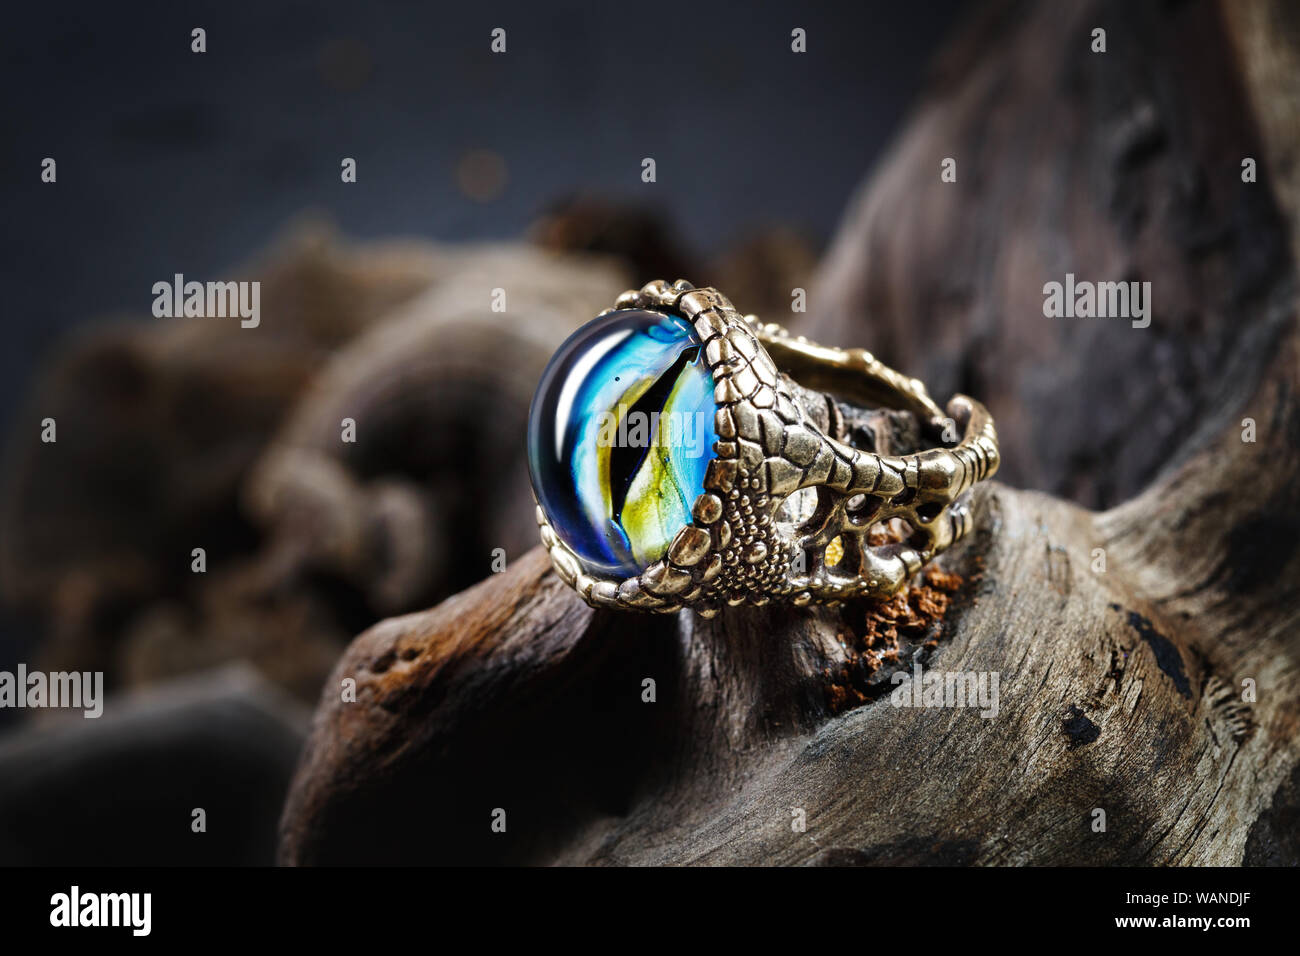 Creative ring with dragon eye on nature background, lampwork jewelry, close-up view Stock Photo